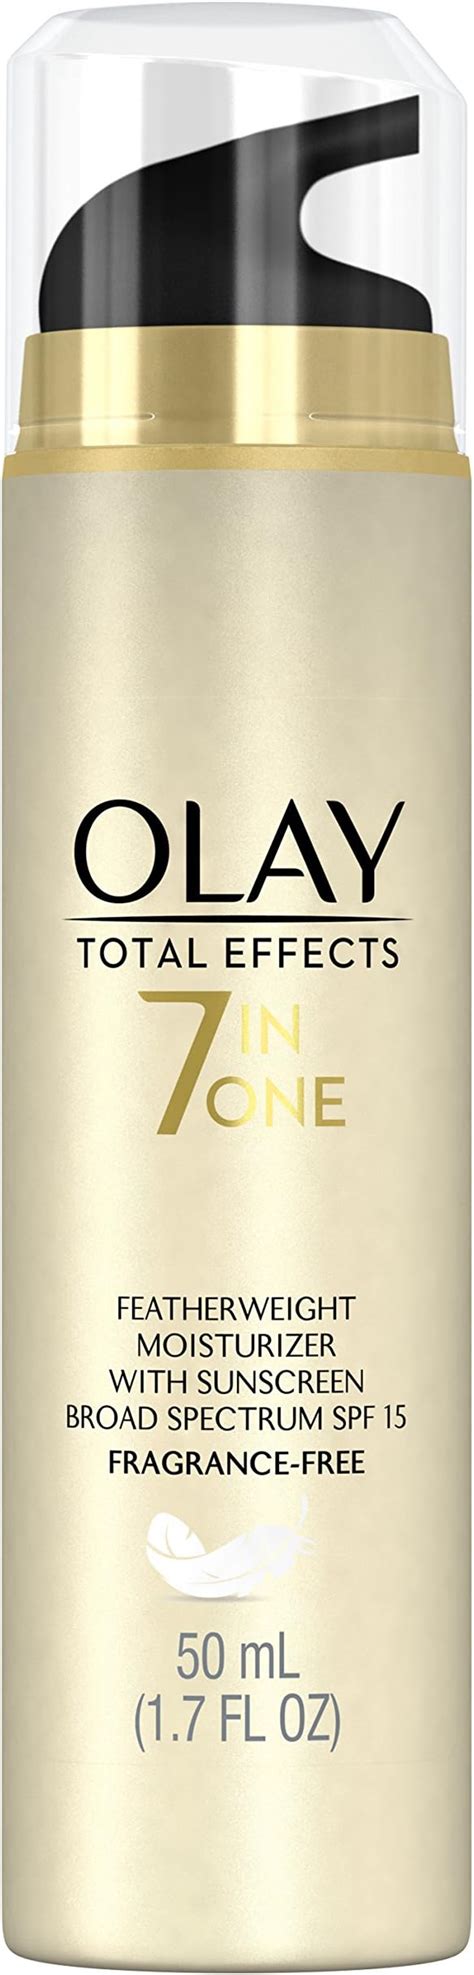 Olay Total Effects Fragrance Free Featherweight Moisturizer With Spf 15